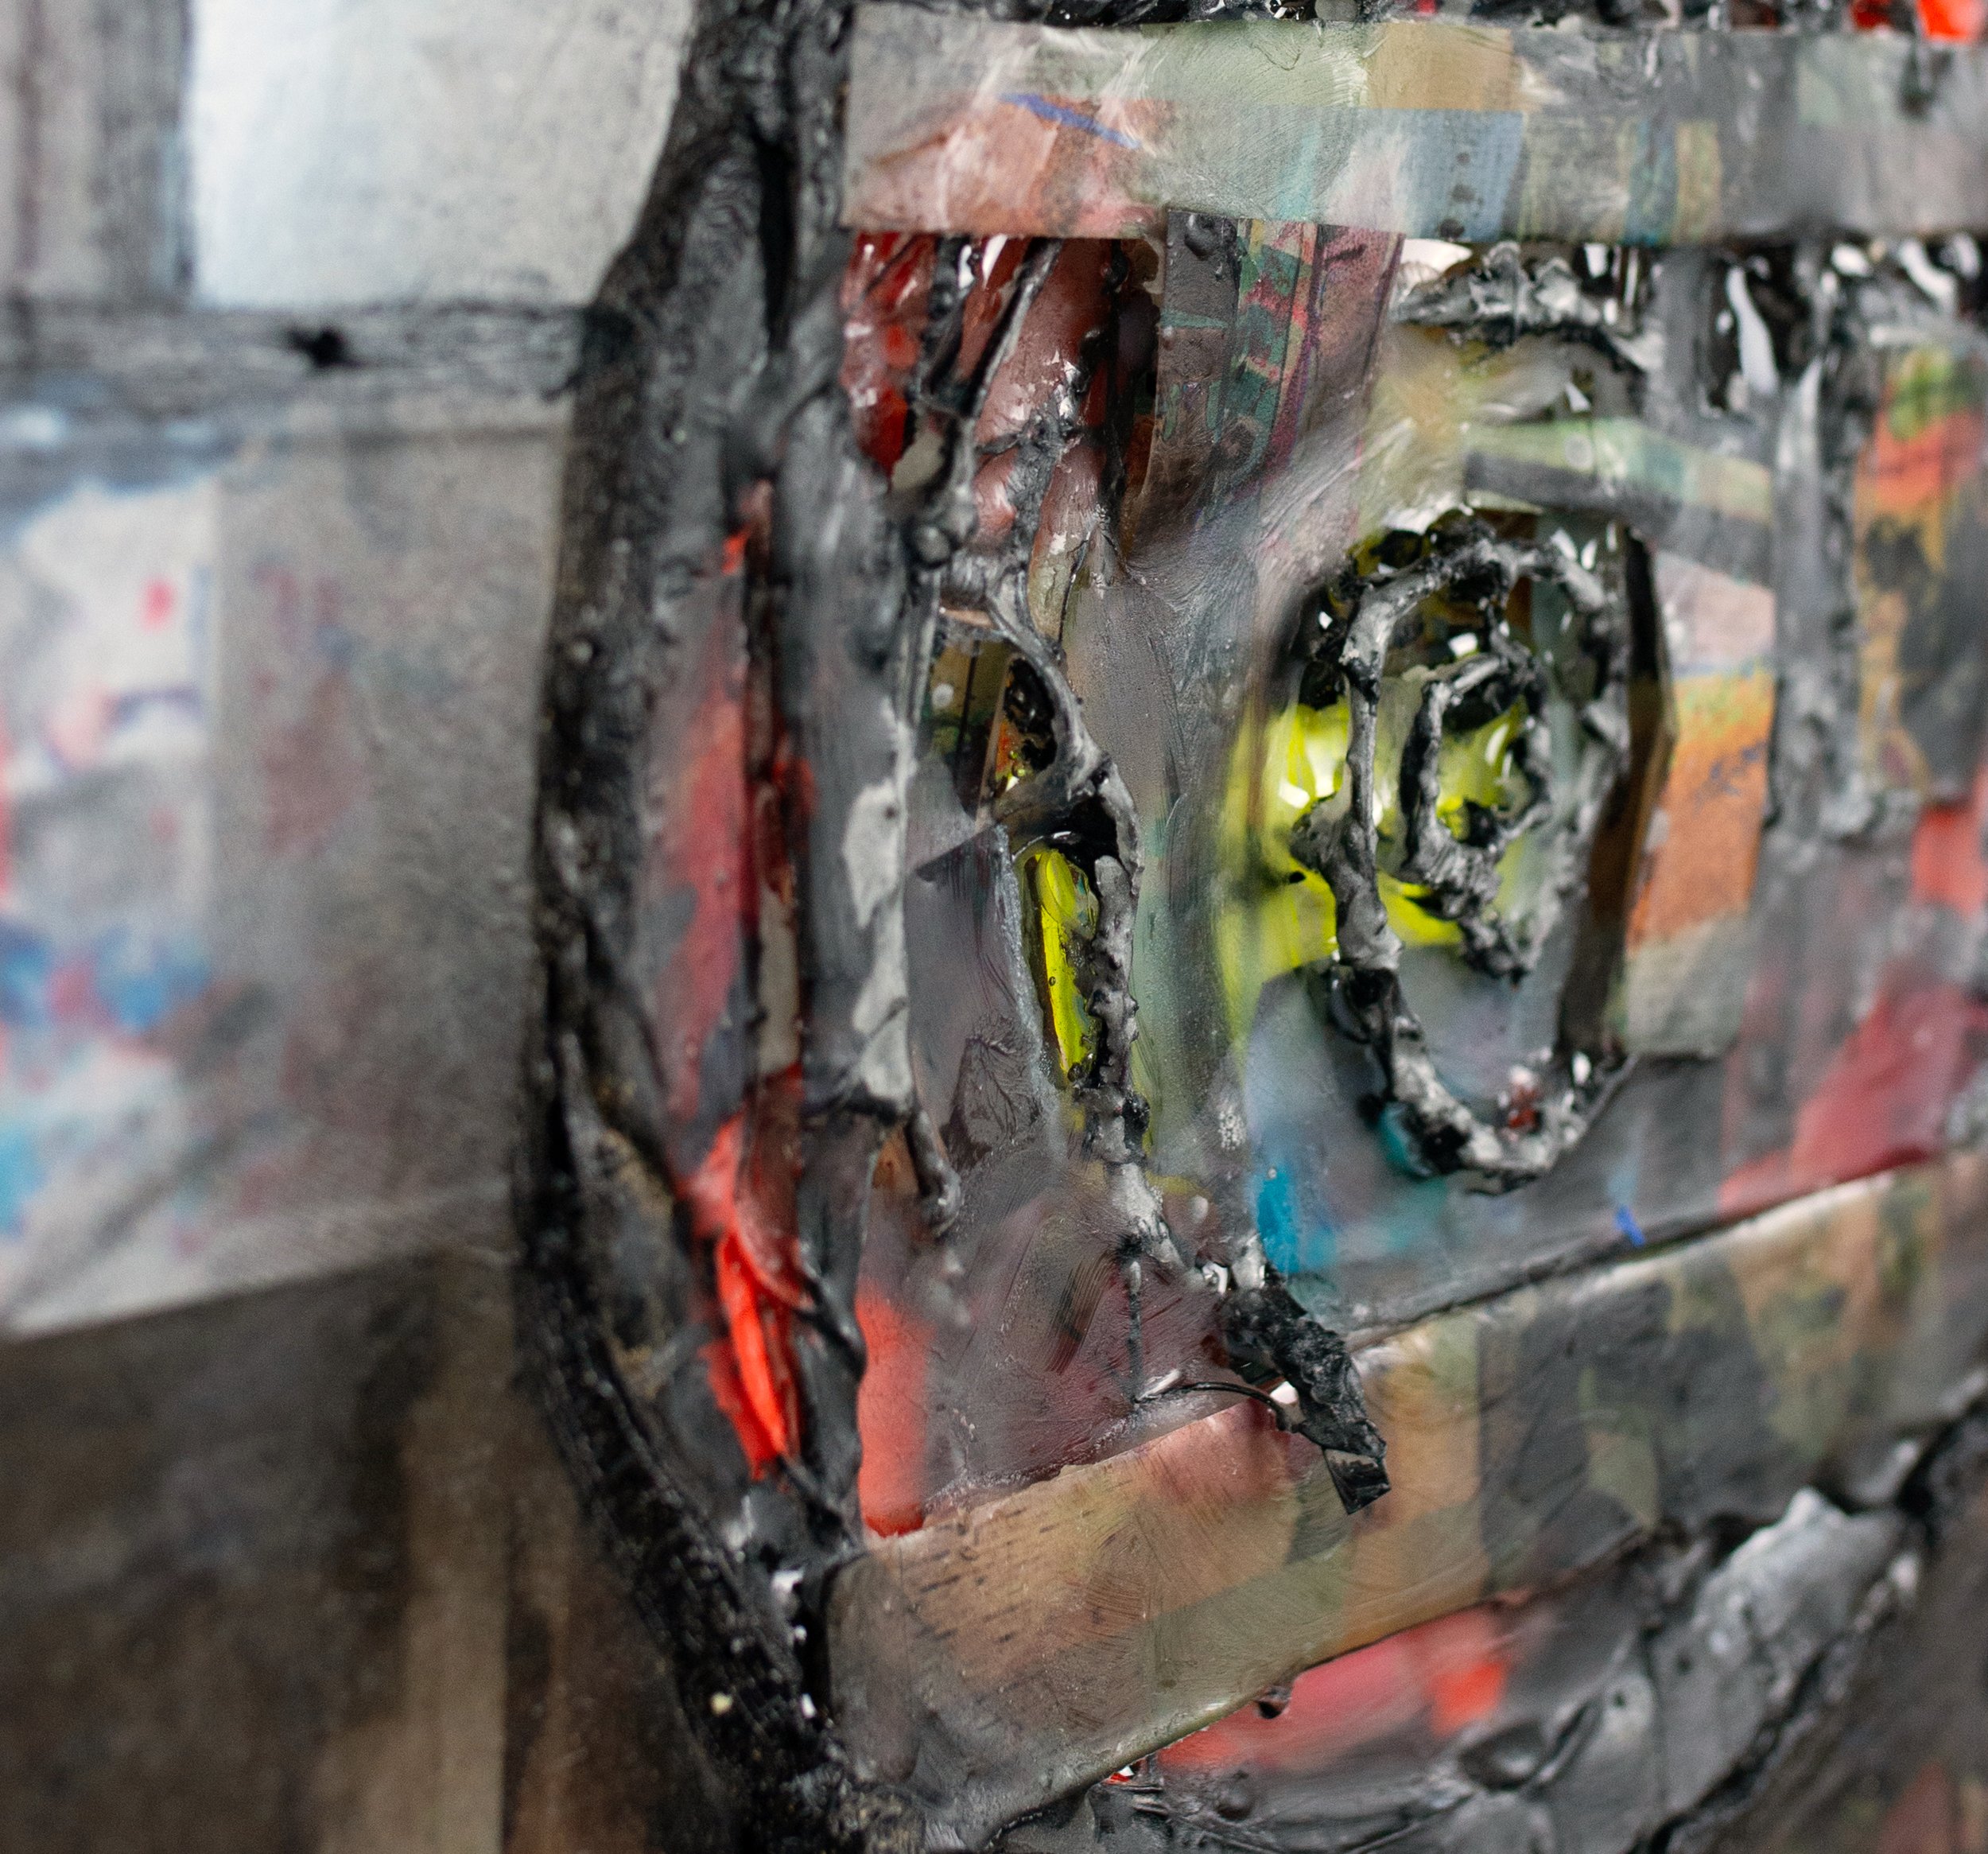    Time Be Patient    *detail  Oil, acrylic, photographs, wire, epoxy, on collages panels   18 x 14 in. 